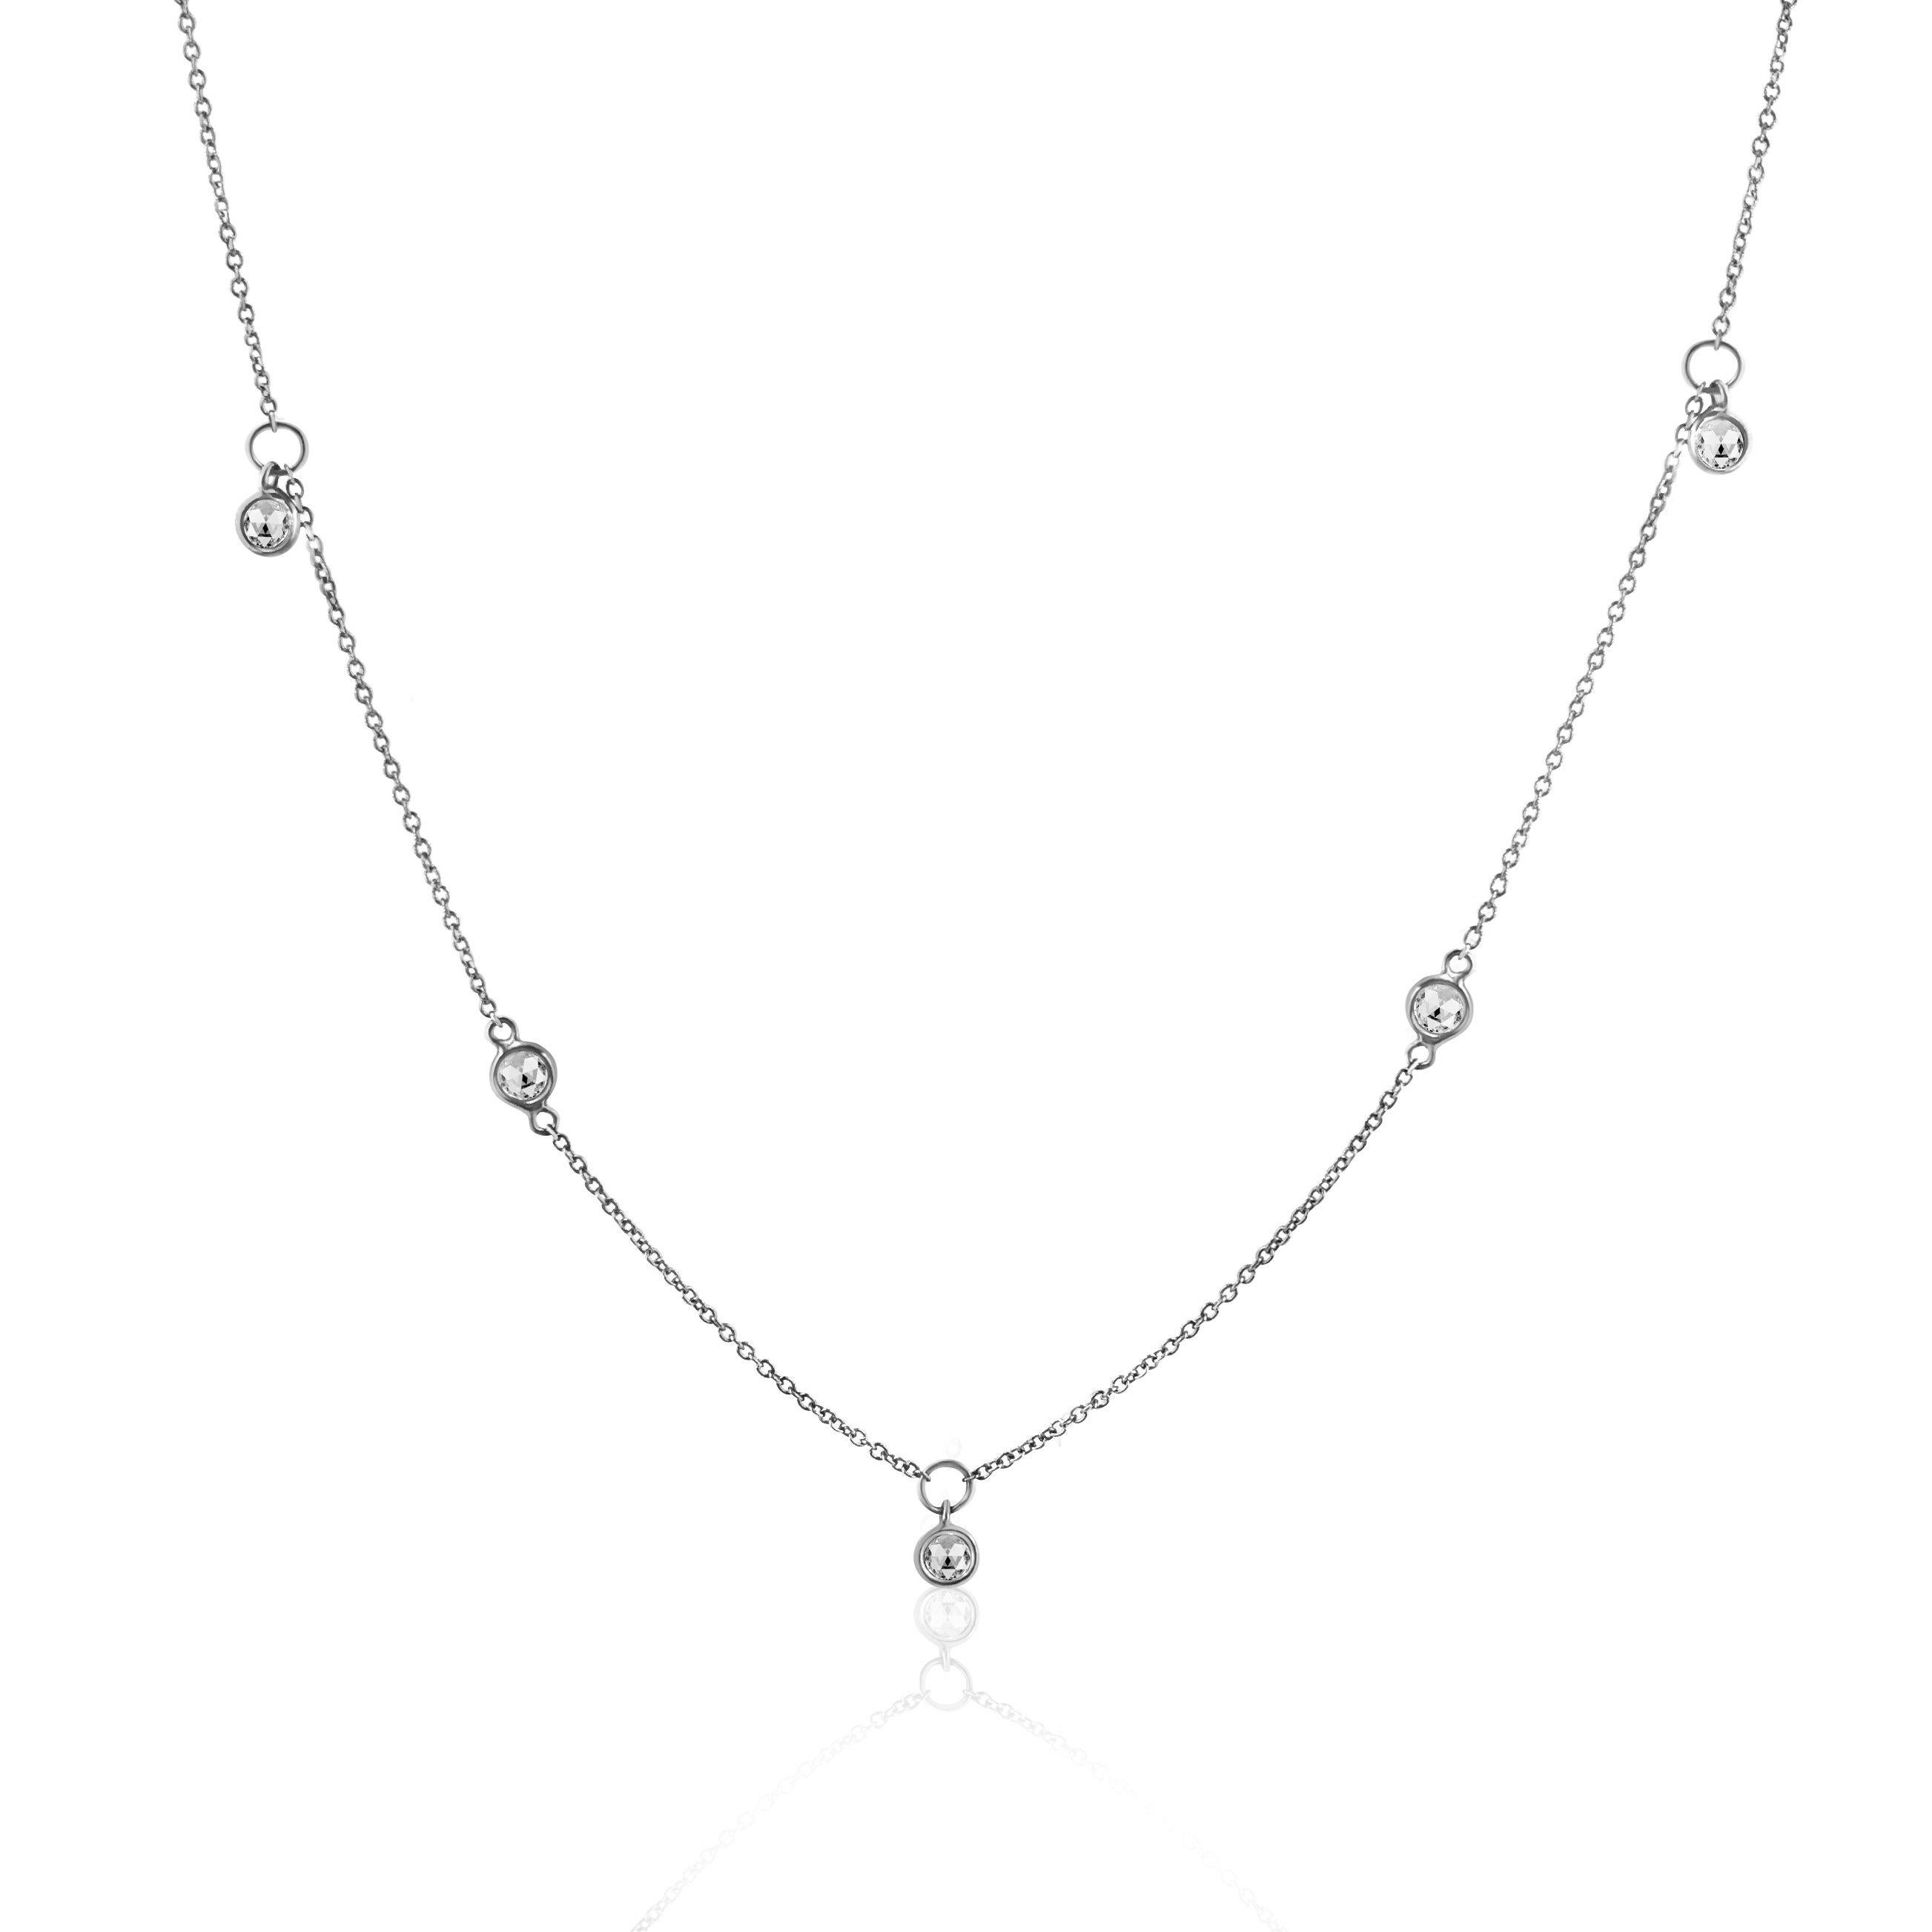 Rock & Divine Dawn Collection Sunshine Diamond Necklace in 18K Gold 0.30 CTW

PRIMARY DETAILS
SKU: 102452
Listing Title: Rock & Divine Dawn Collection Sunshine Diamond Necklace in 18K Gold 0.30 CTW
Condition Description: Retails for 1250 USD. In